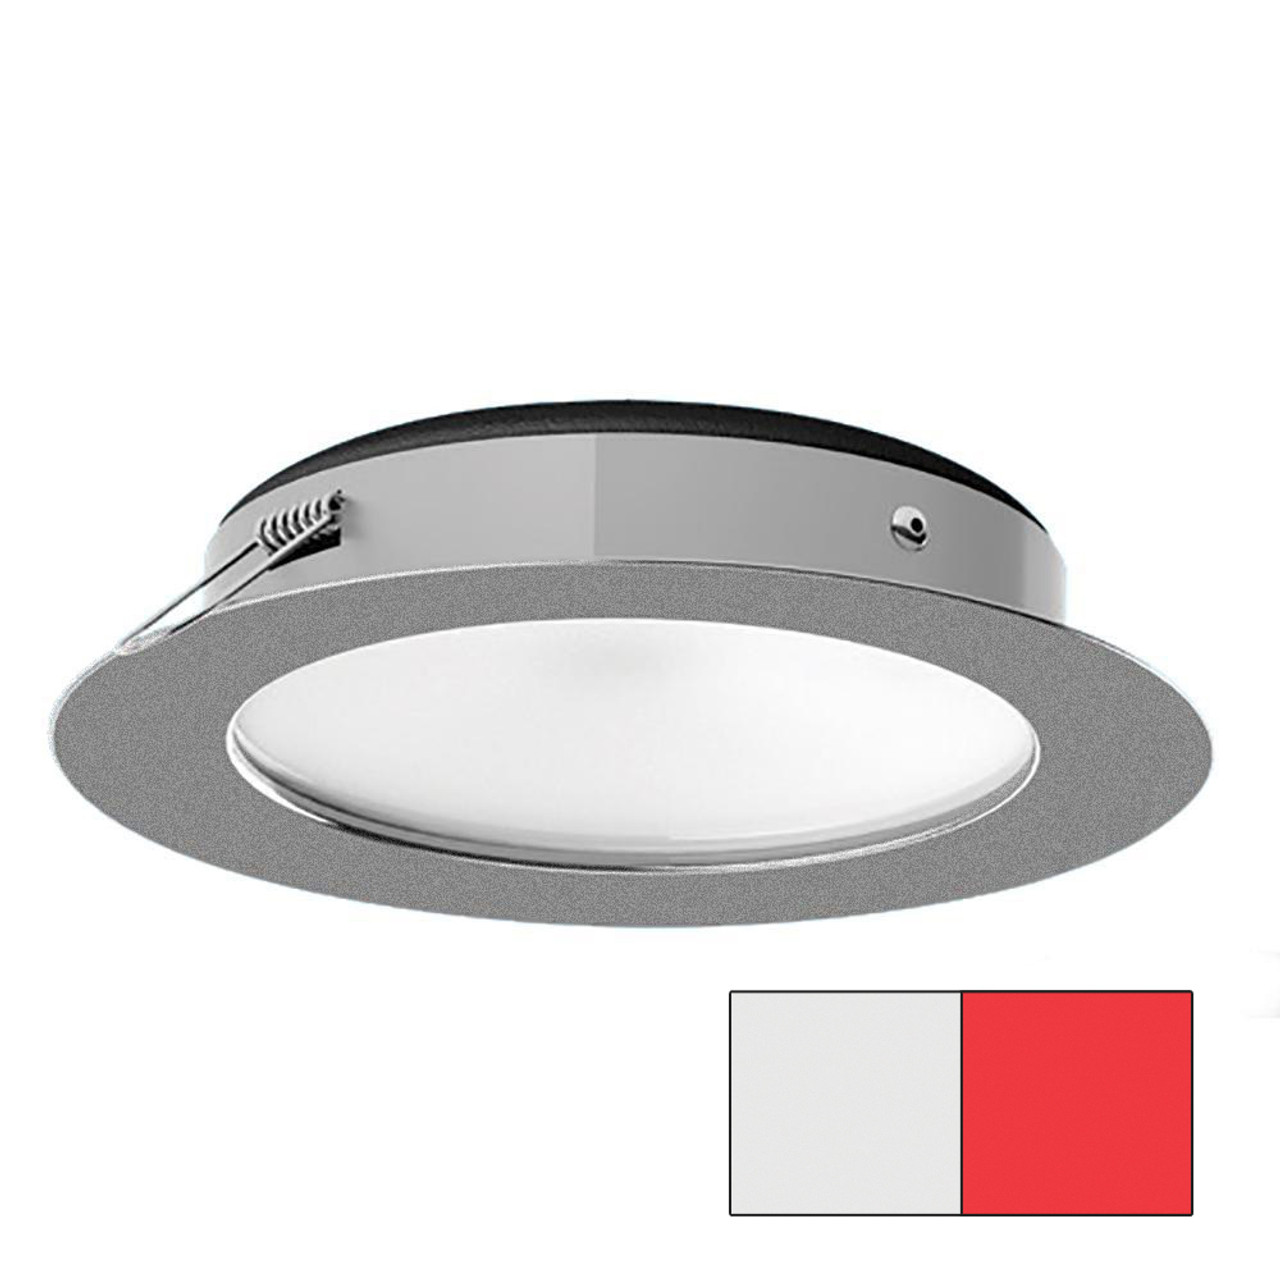 i2Systems - Apeiron Pro XL A526 - 6W, Spring Mount, Cool White/Red, Brushed Nickel Finish - Apollo Lighting